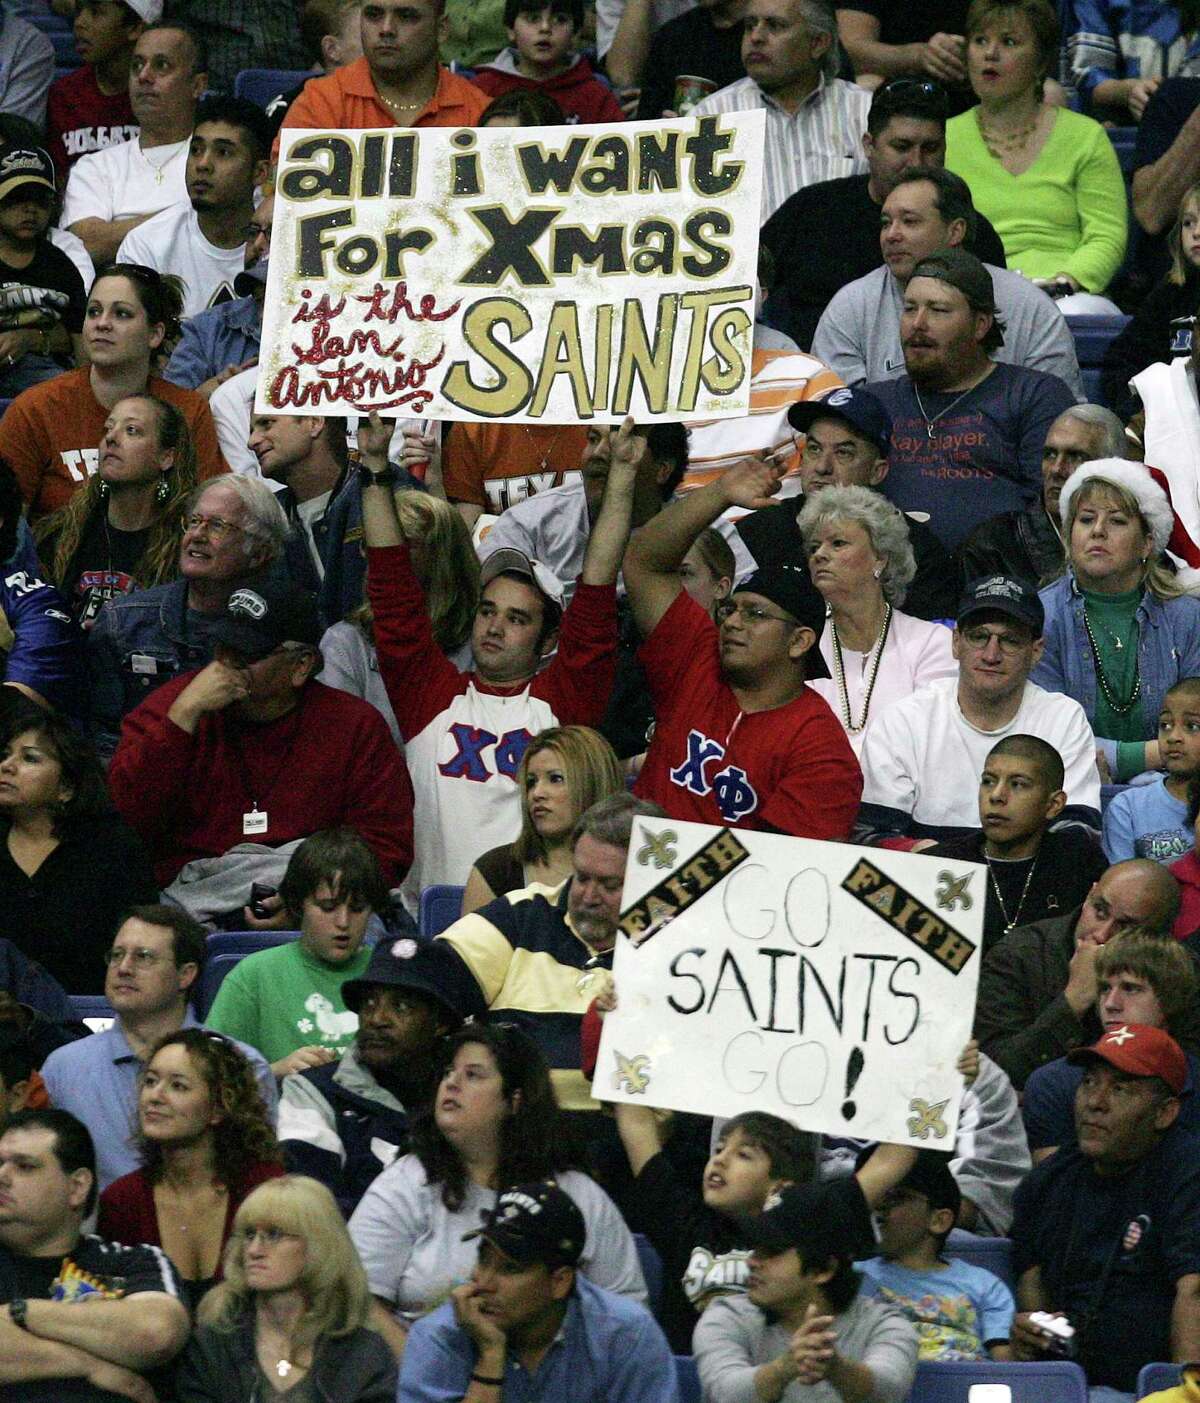 Signs held by fans express the desire to have a professional football team in San Antonio during the Saints-Detroit Lions game at the Alamodome on Saturday, December 24, 2005. (Kin Man Hui/staff)